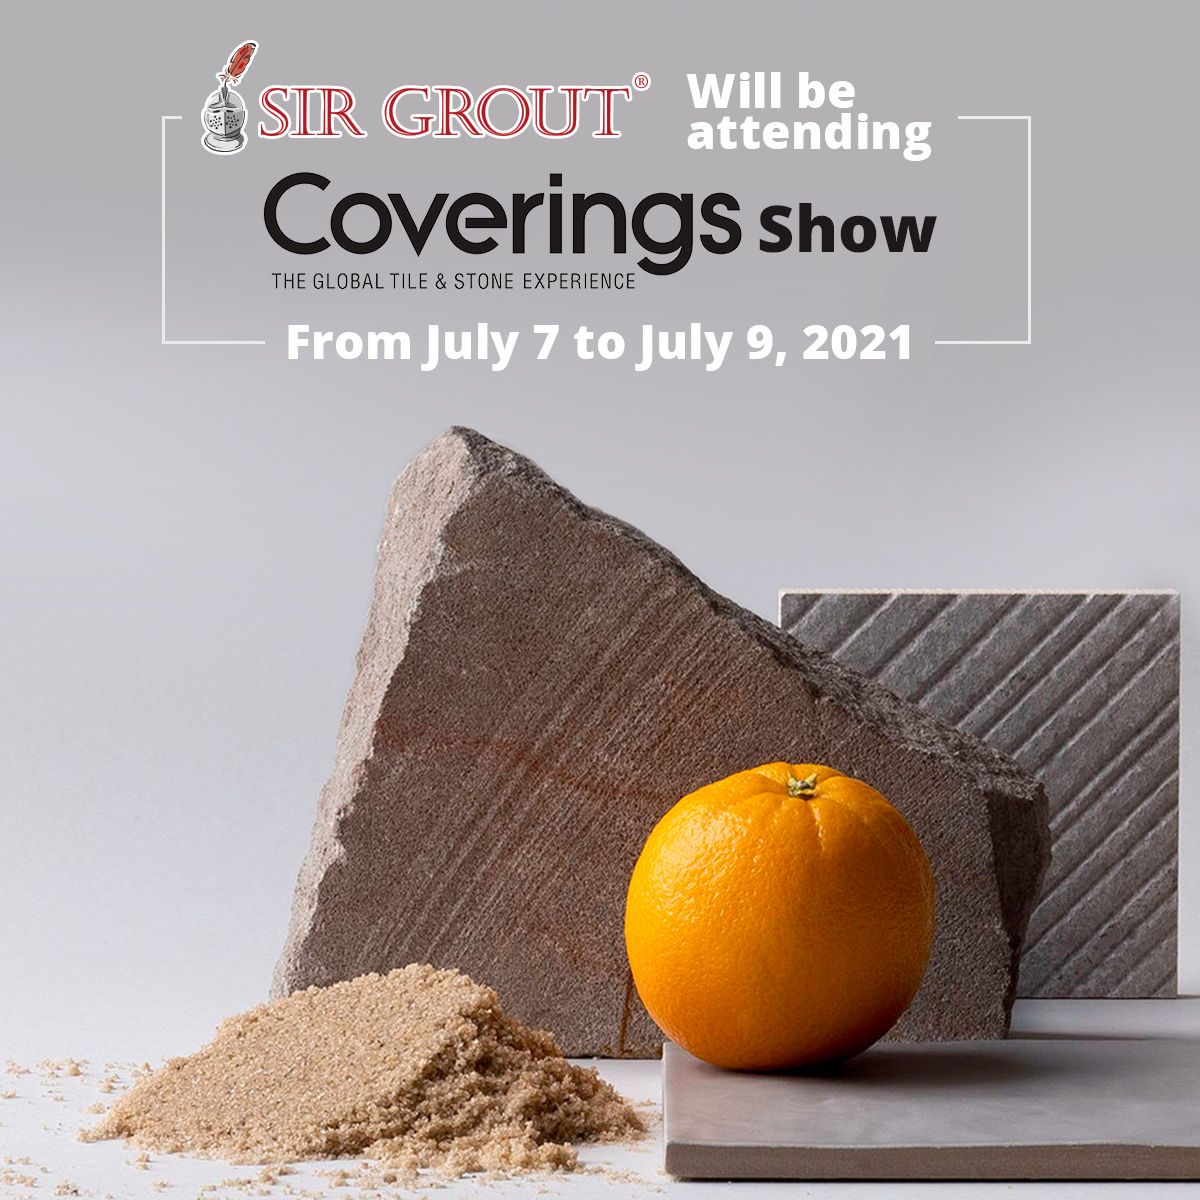 Sir Grout Will be in the Coverings Show, From July 7 to July 9, 2021